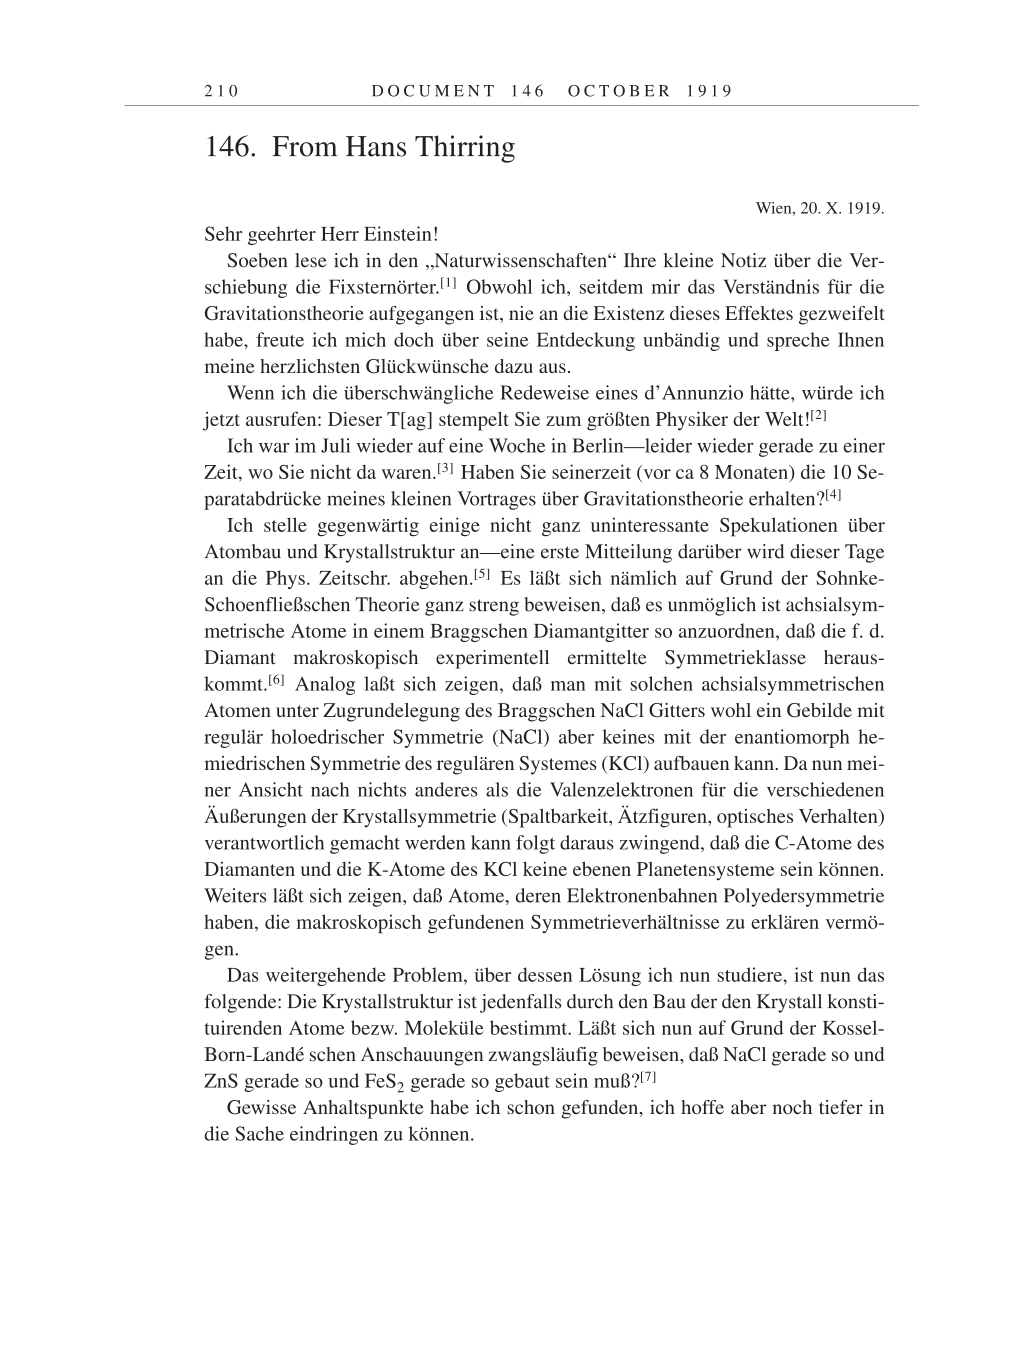 Volume 9: The Berlin Years: Correspondence January 1919-April 1920 page 210